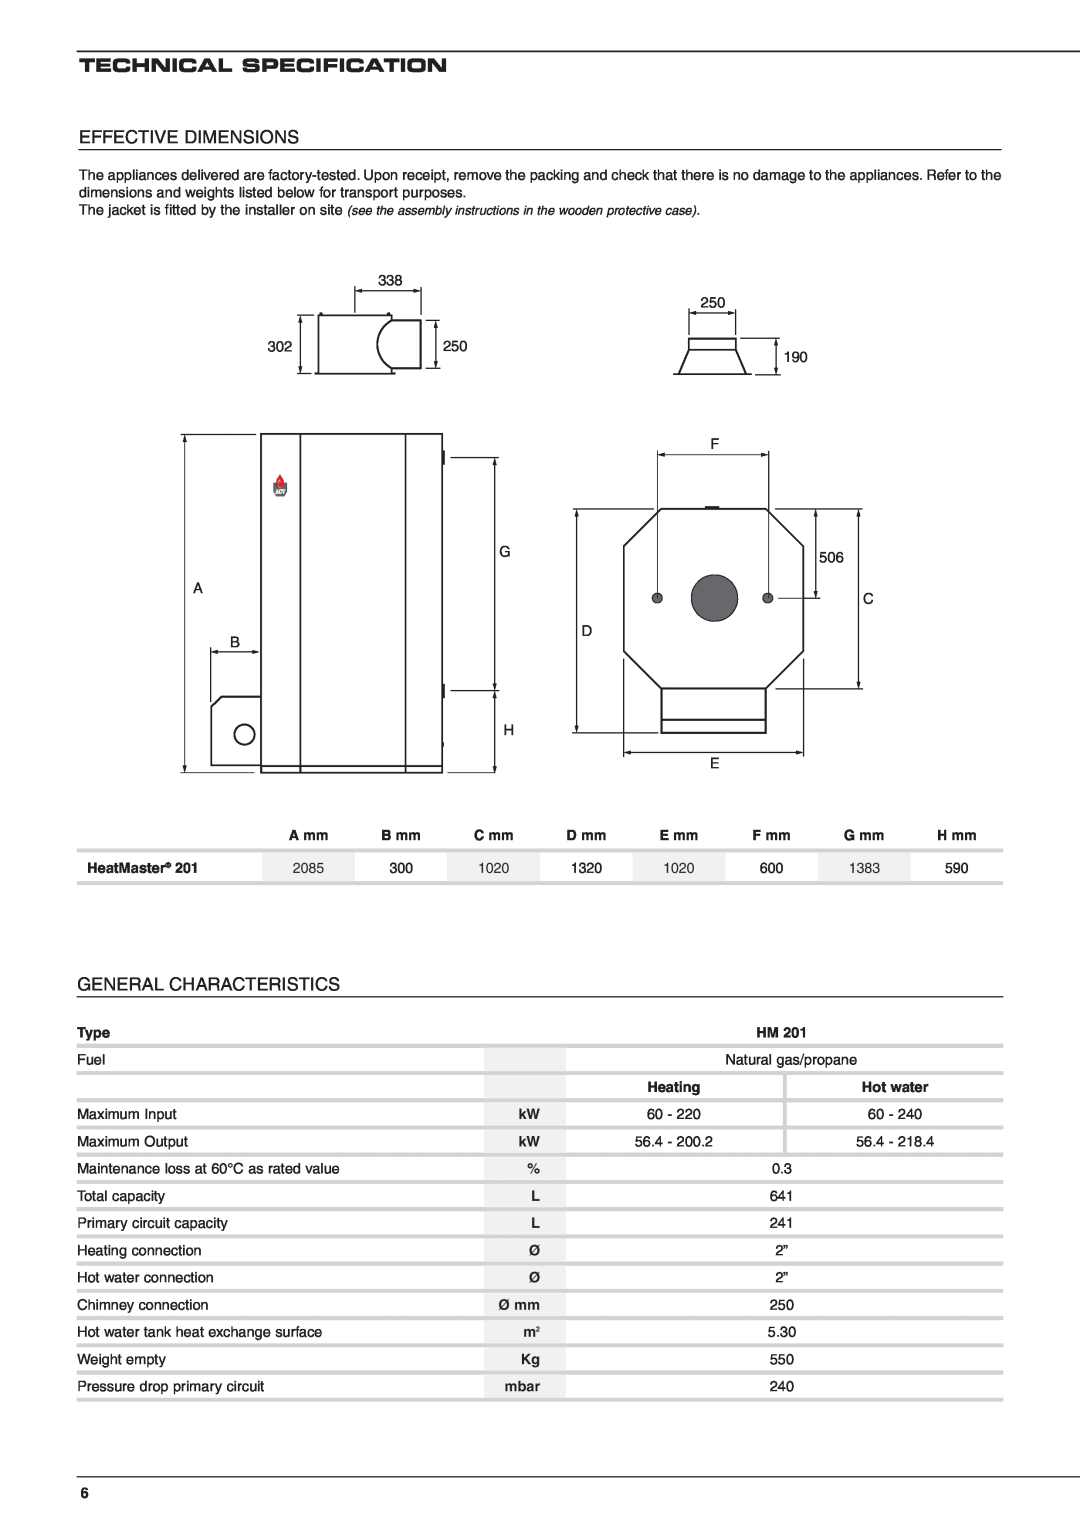 Heatmaster 201 manual Technical Specification, Effective Dimensions, General Characteristics 